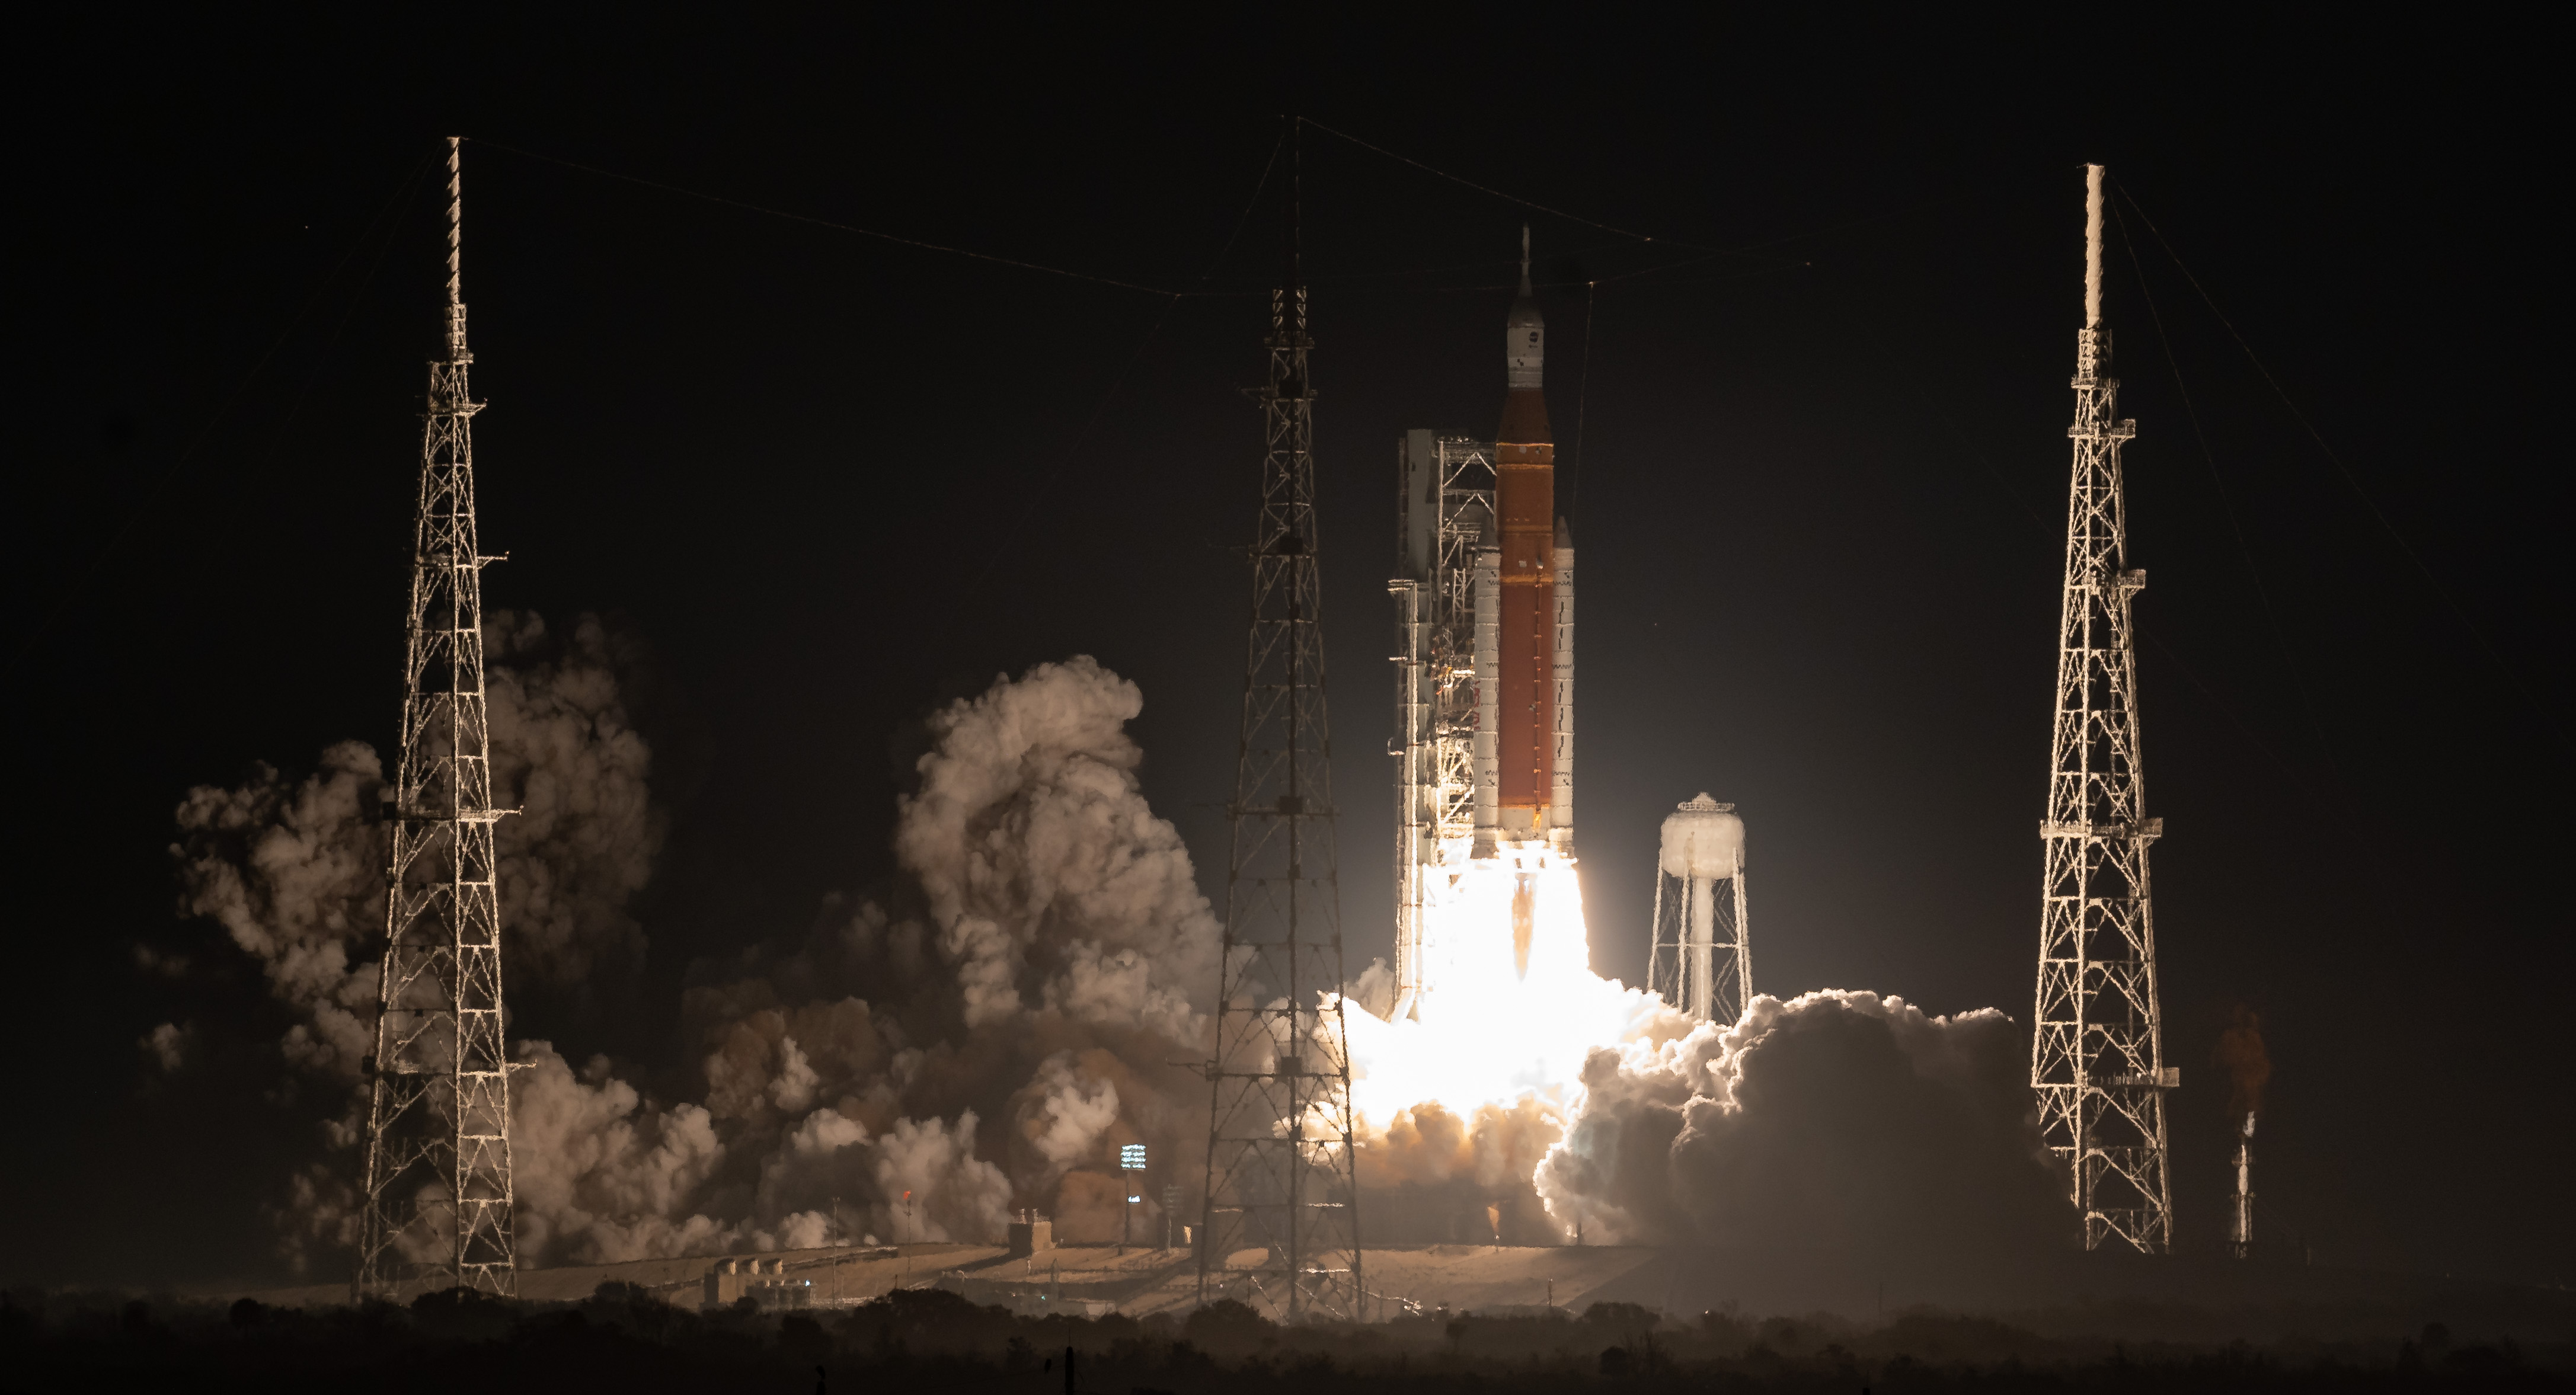 NASA’s Space Launch System rocket carrying the Orion spacecraft launches on the Artemis I flight test, 